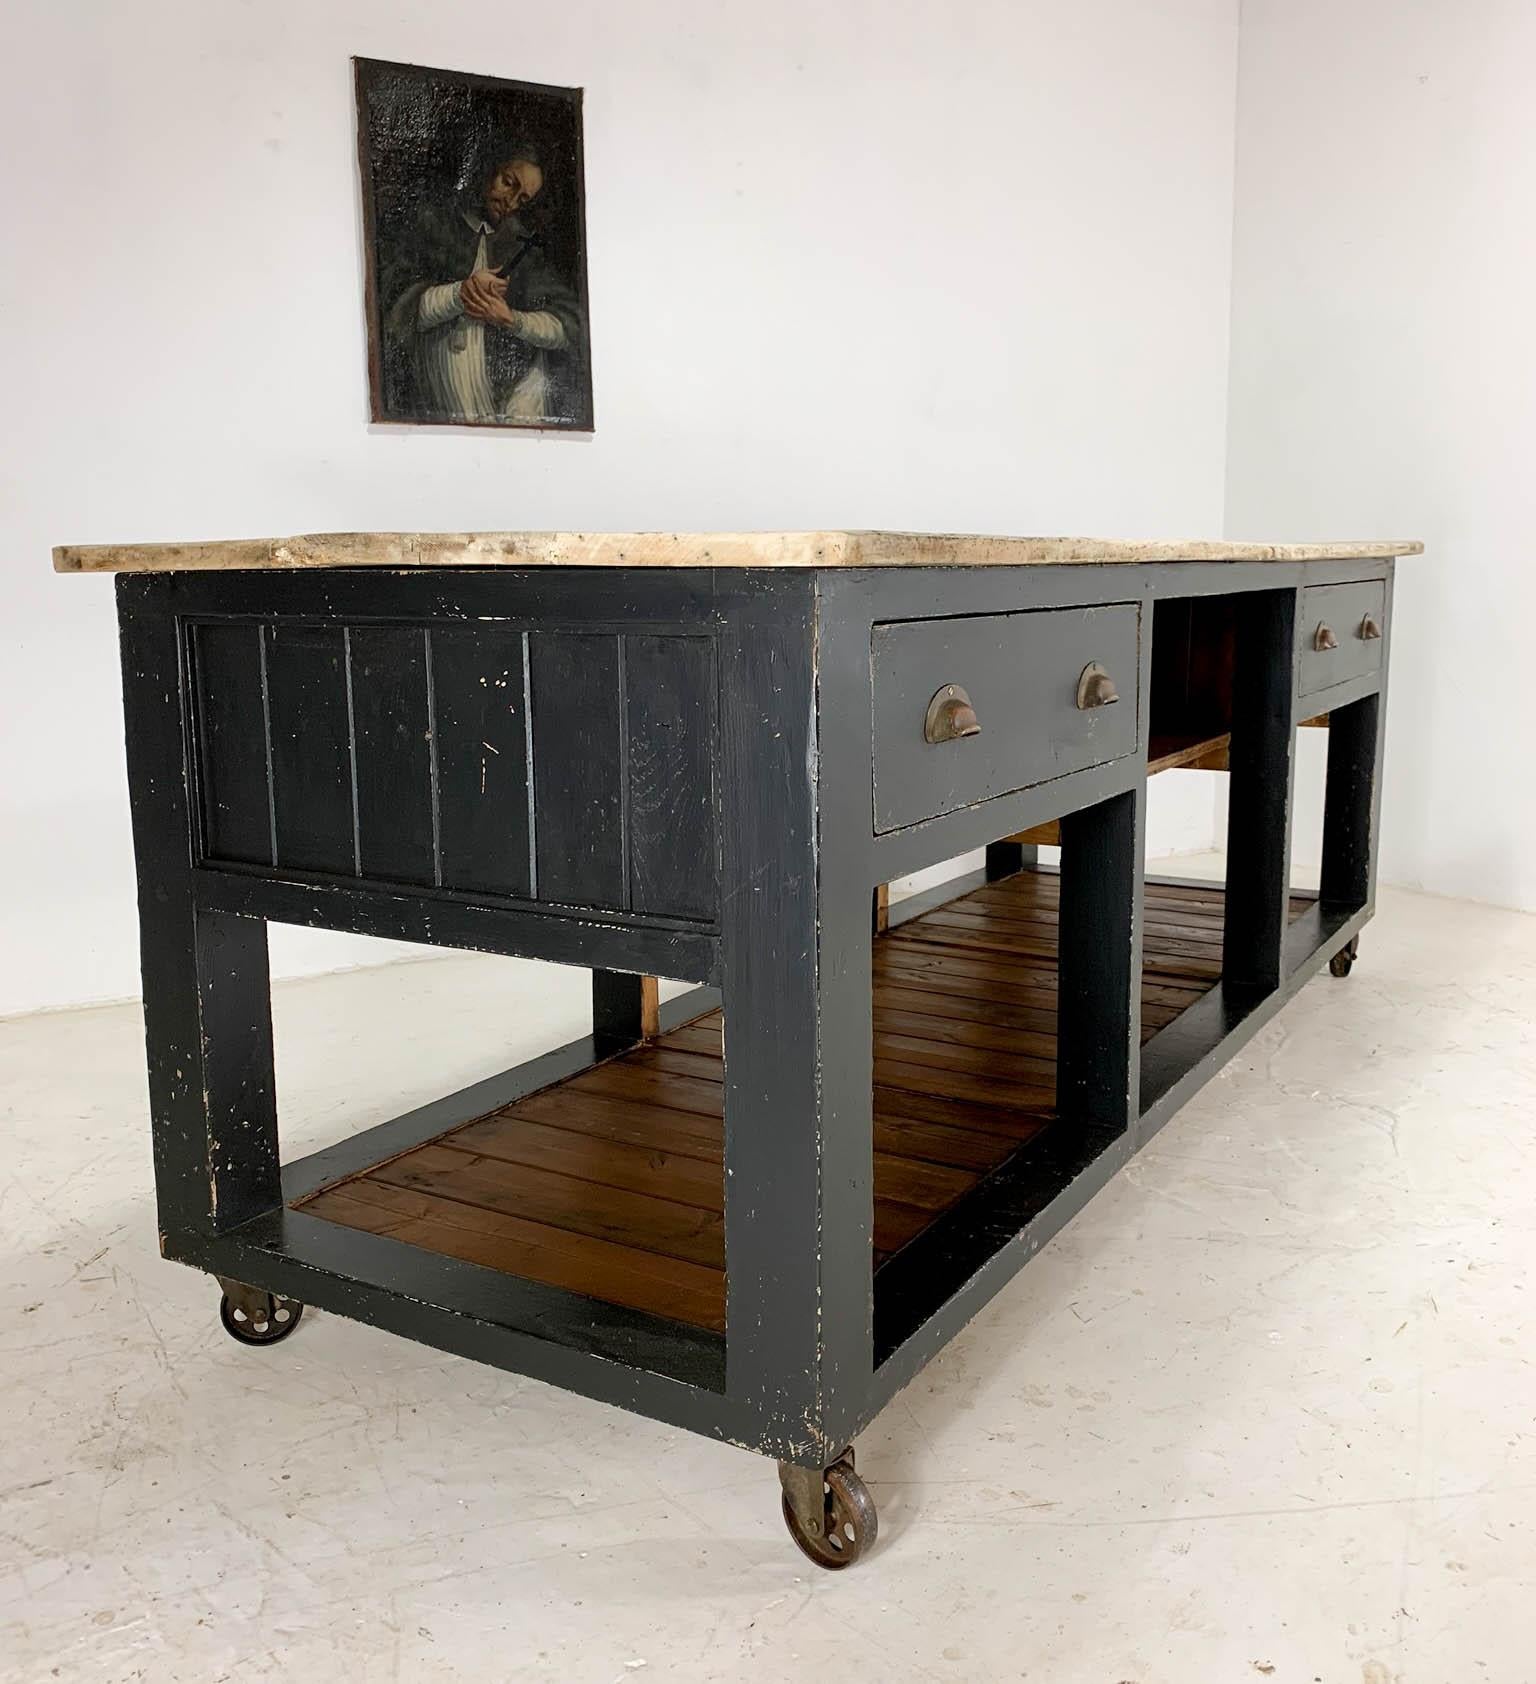 Vintage Baker's table dating from the 1940s, which was part of a clearance we did on an old bakery in Carmarthen- this one was found in an outhouse. The frame has been heavily restored, painted black and distressed. It retains the original sycamore